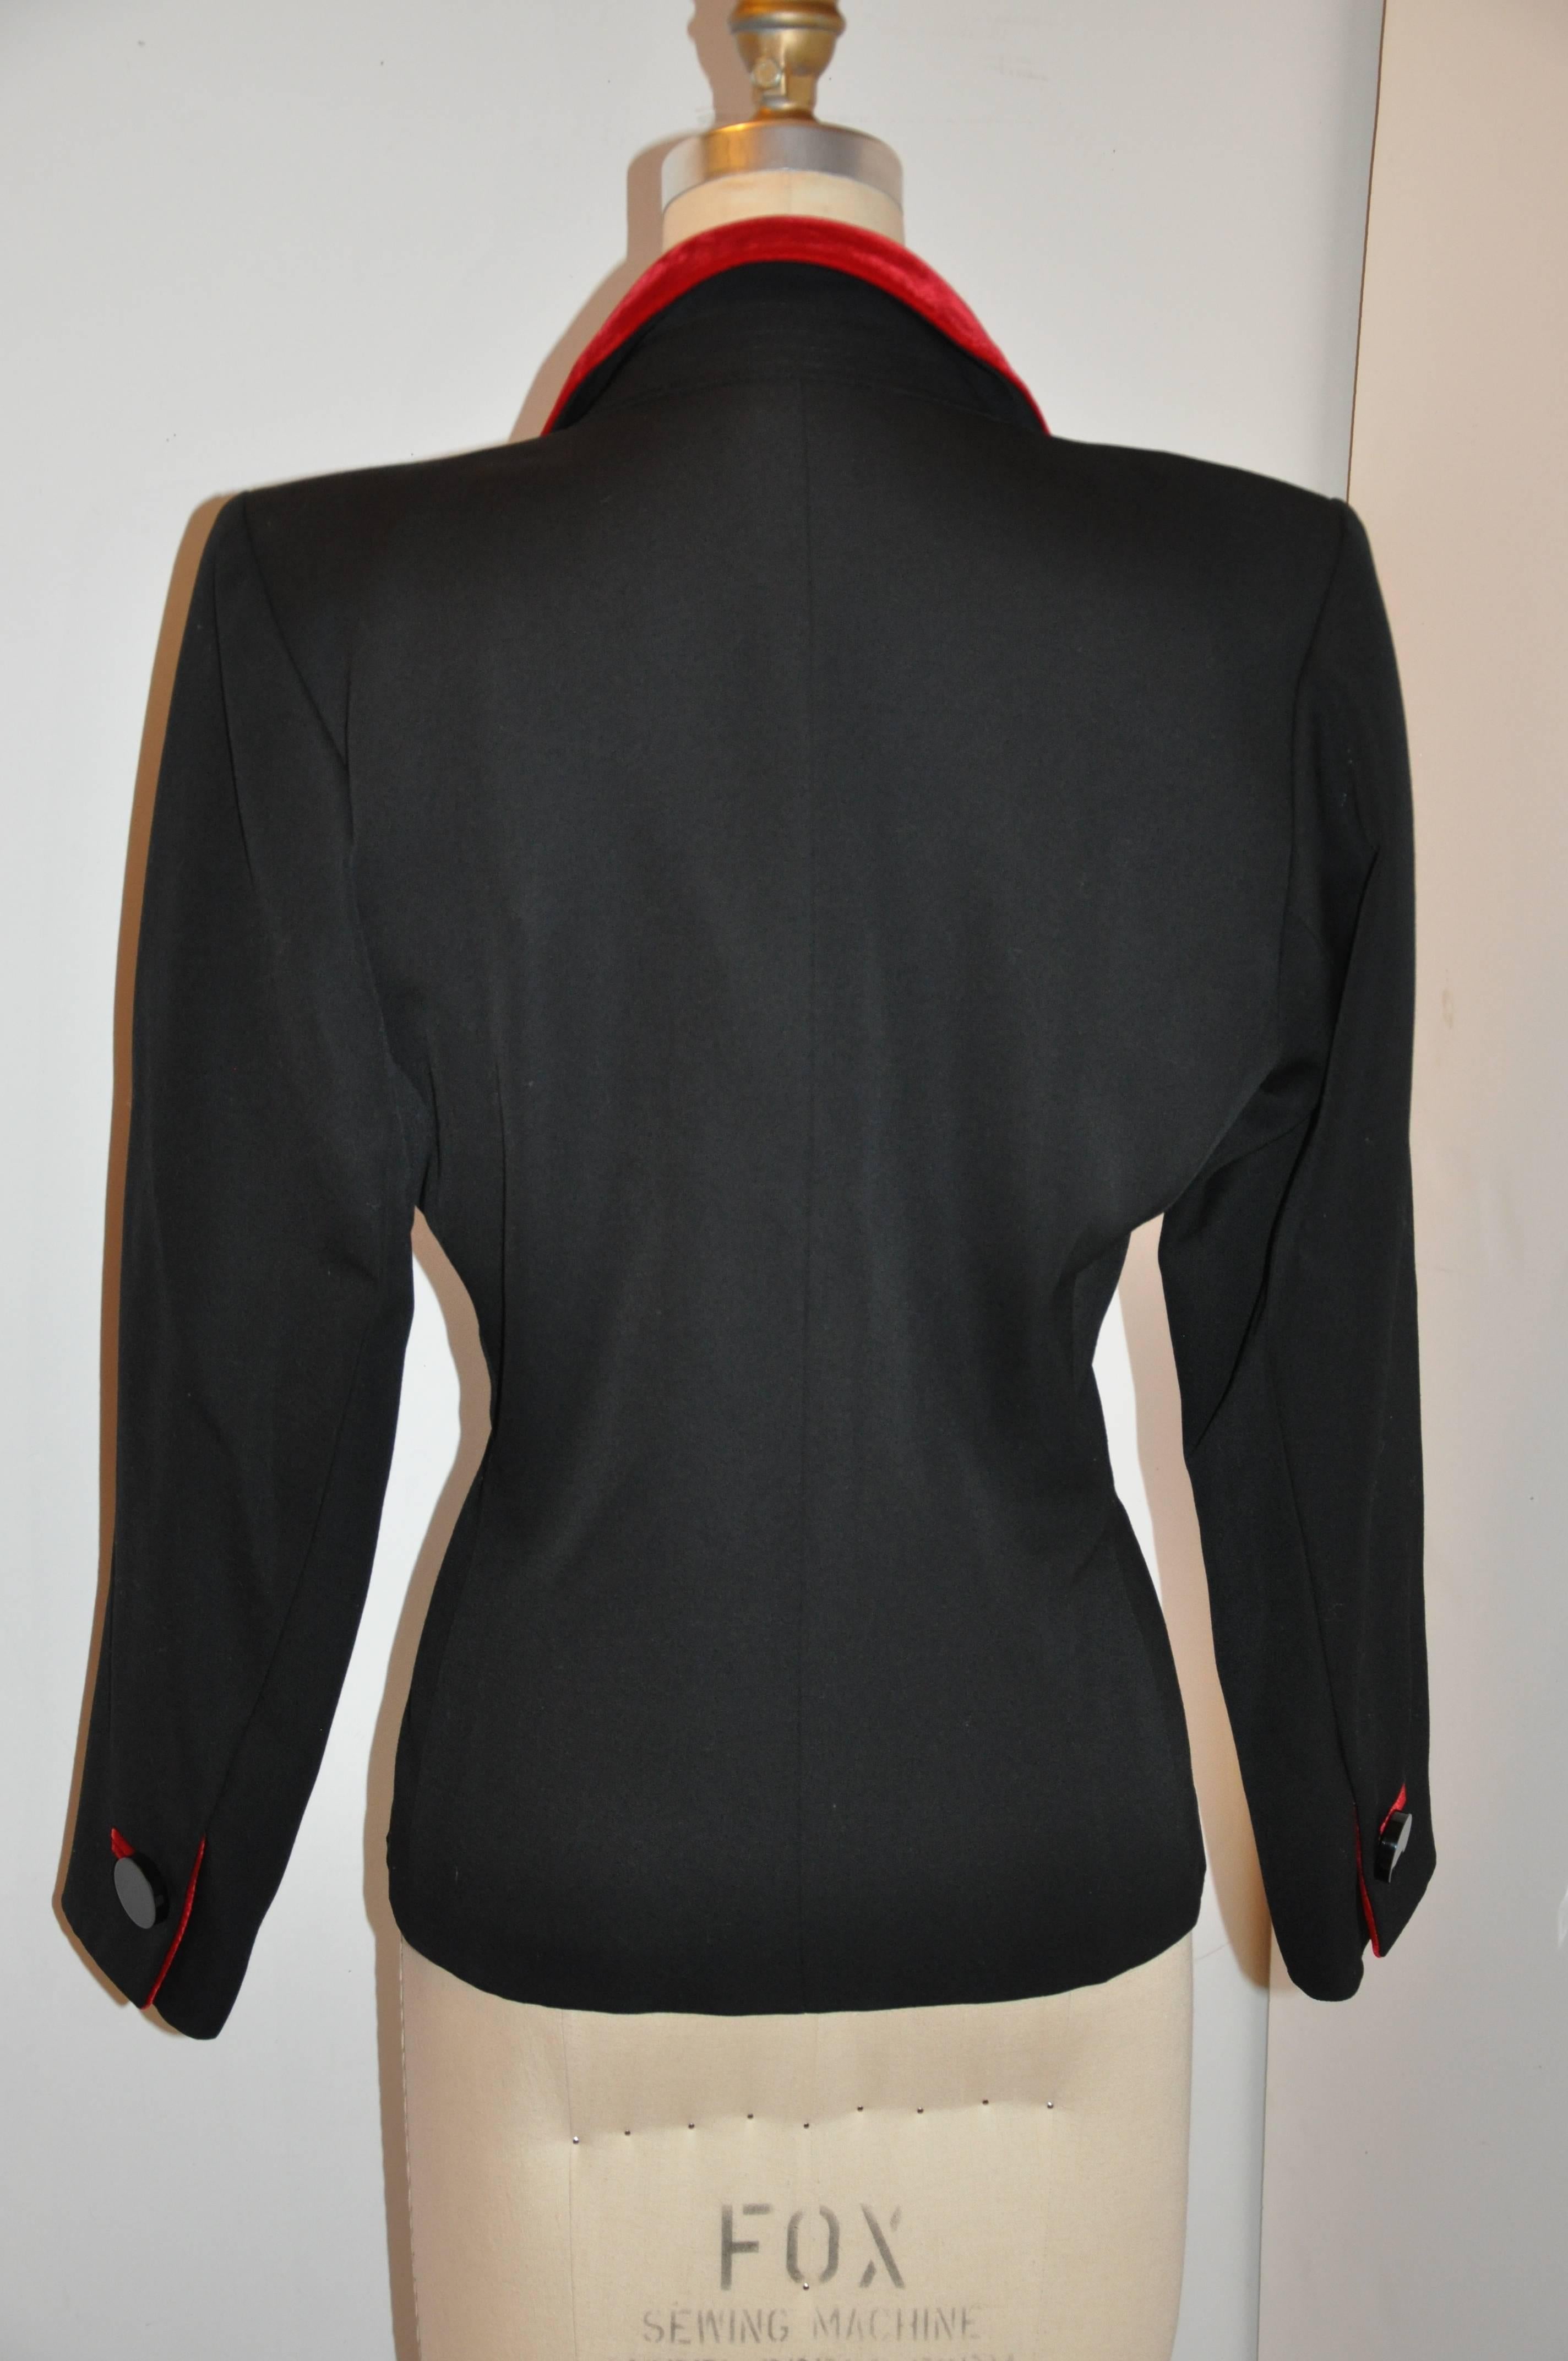        Yves Saint Laurent wonderfully elegant signature black wool accented with red velvet throughout 